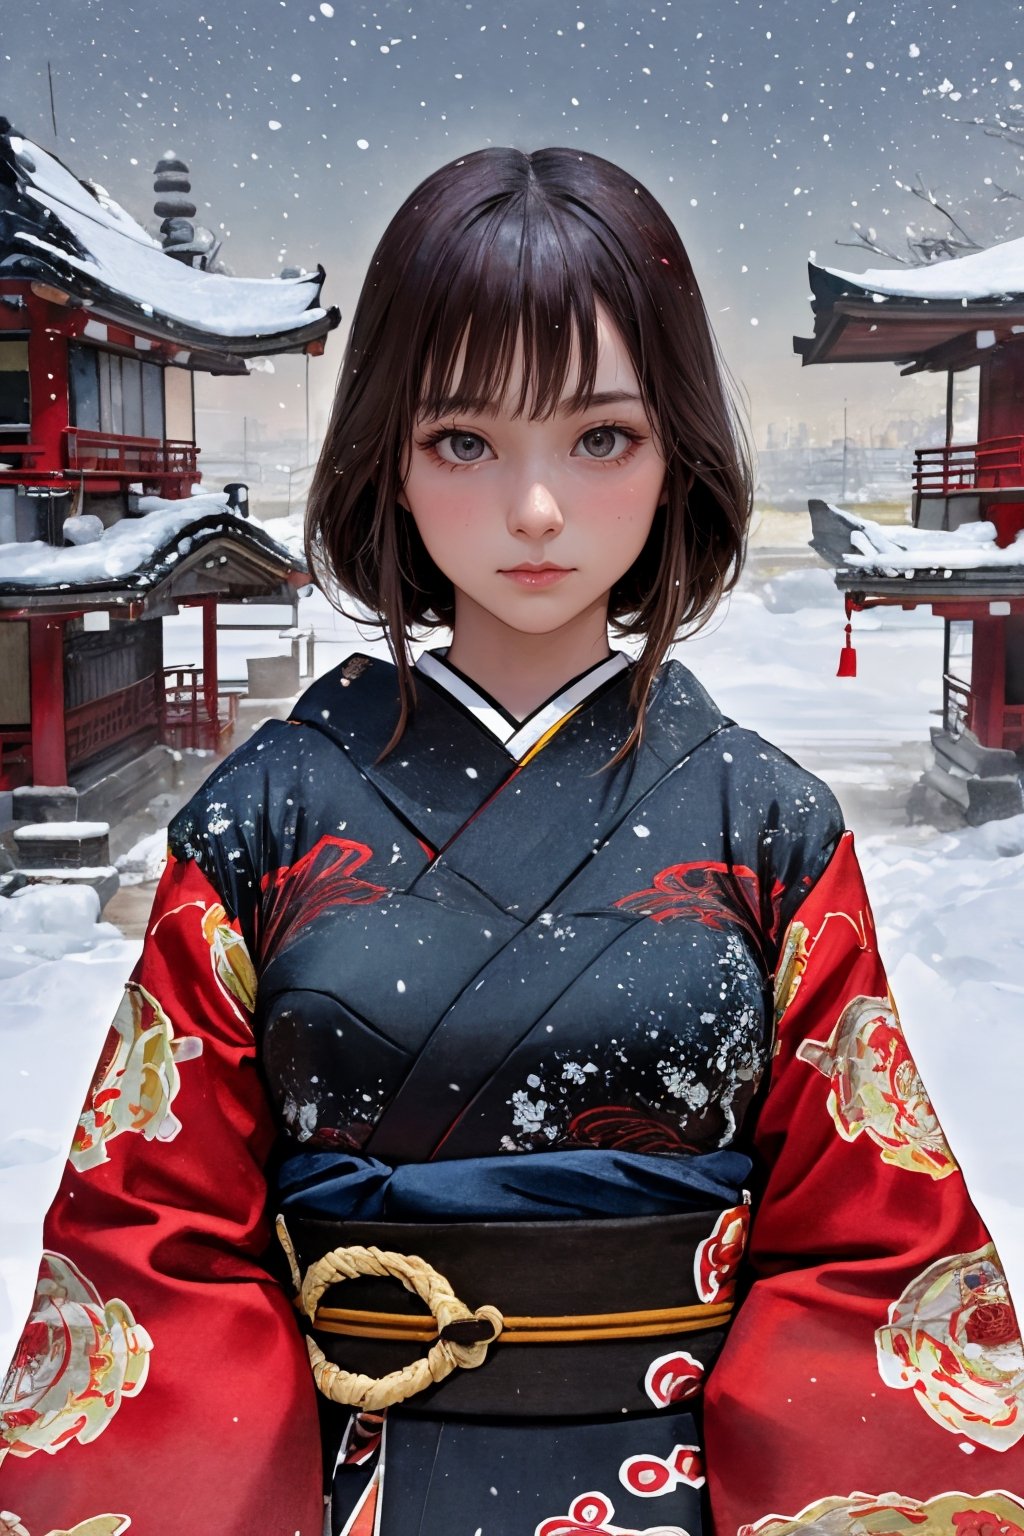 (Hashimoto Kanna as 1 Japanese Ninja:1.2) (autumn, snowing), (water color style, double exposure) ,(sexy ninja outfit), dim light, muted color,Impressionism, (ultra detailed background of a ancient Japanese buildings), harmonious composition, epic art work, Hashimoto Kanna